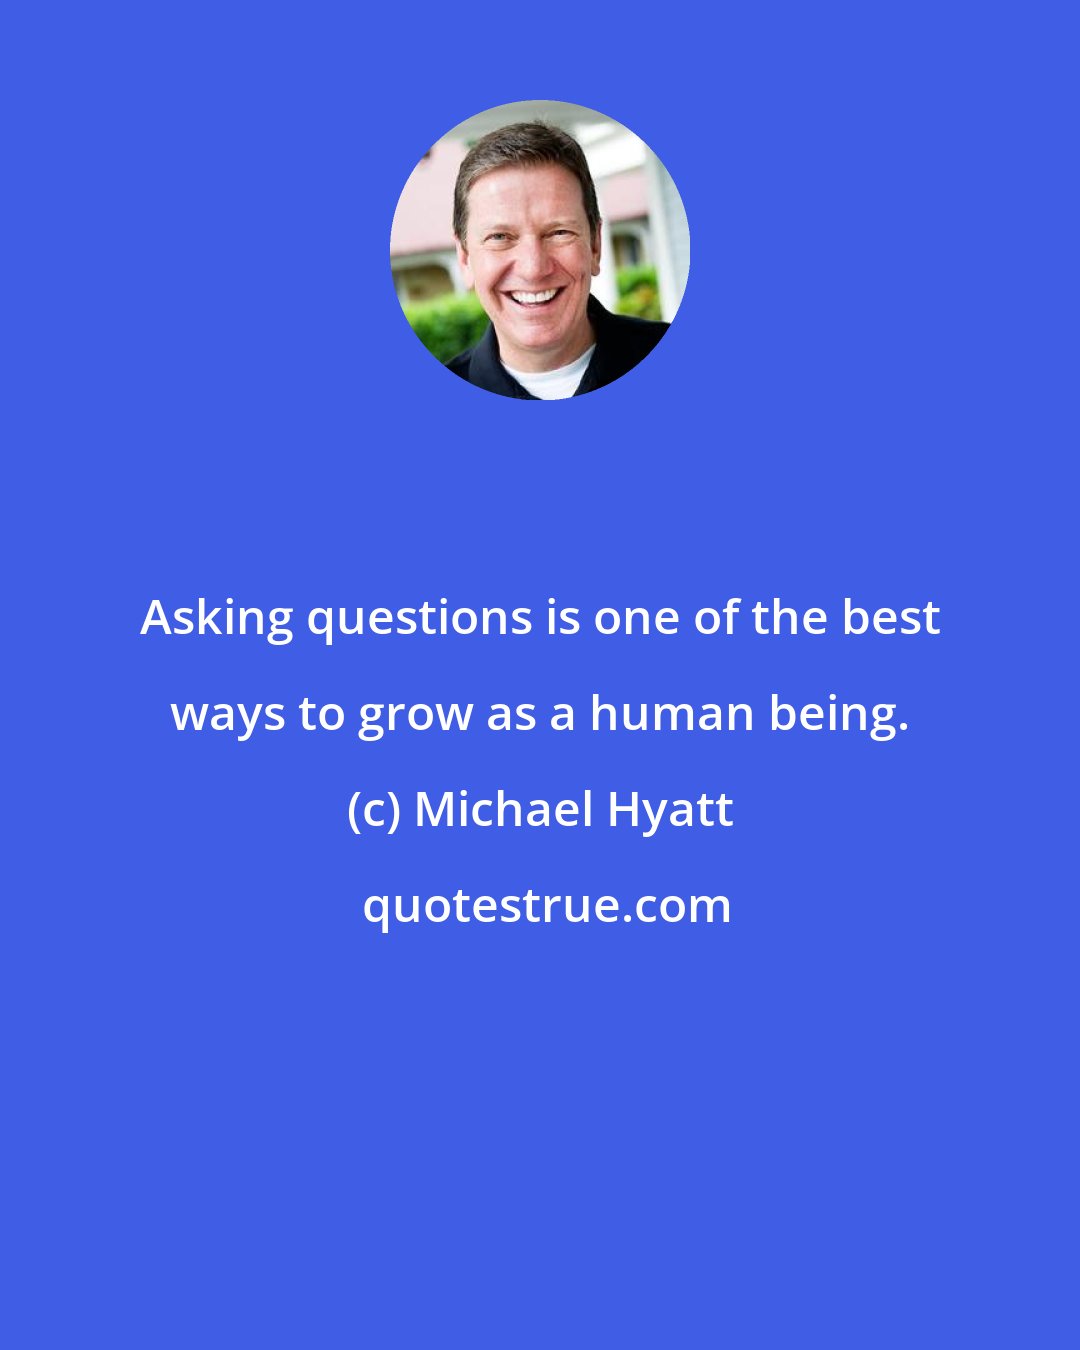 Michael Hyatt: Asking questions is one of the best ways to grow as a human being.